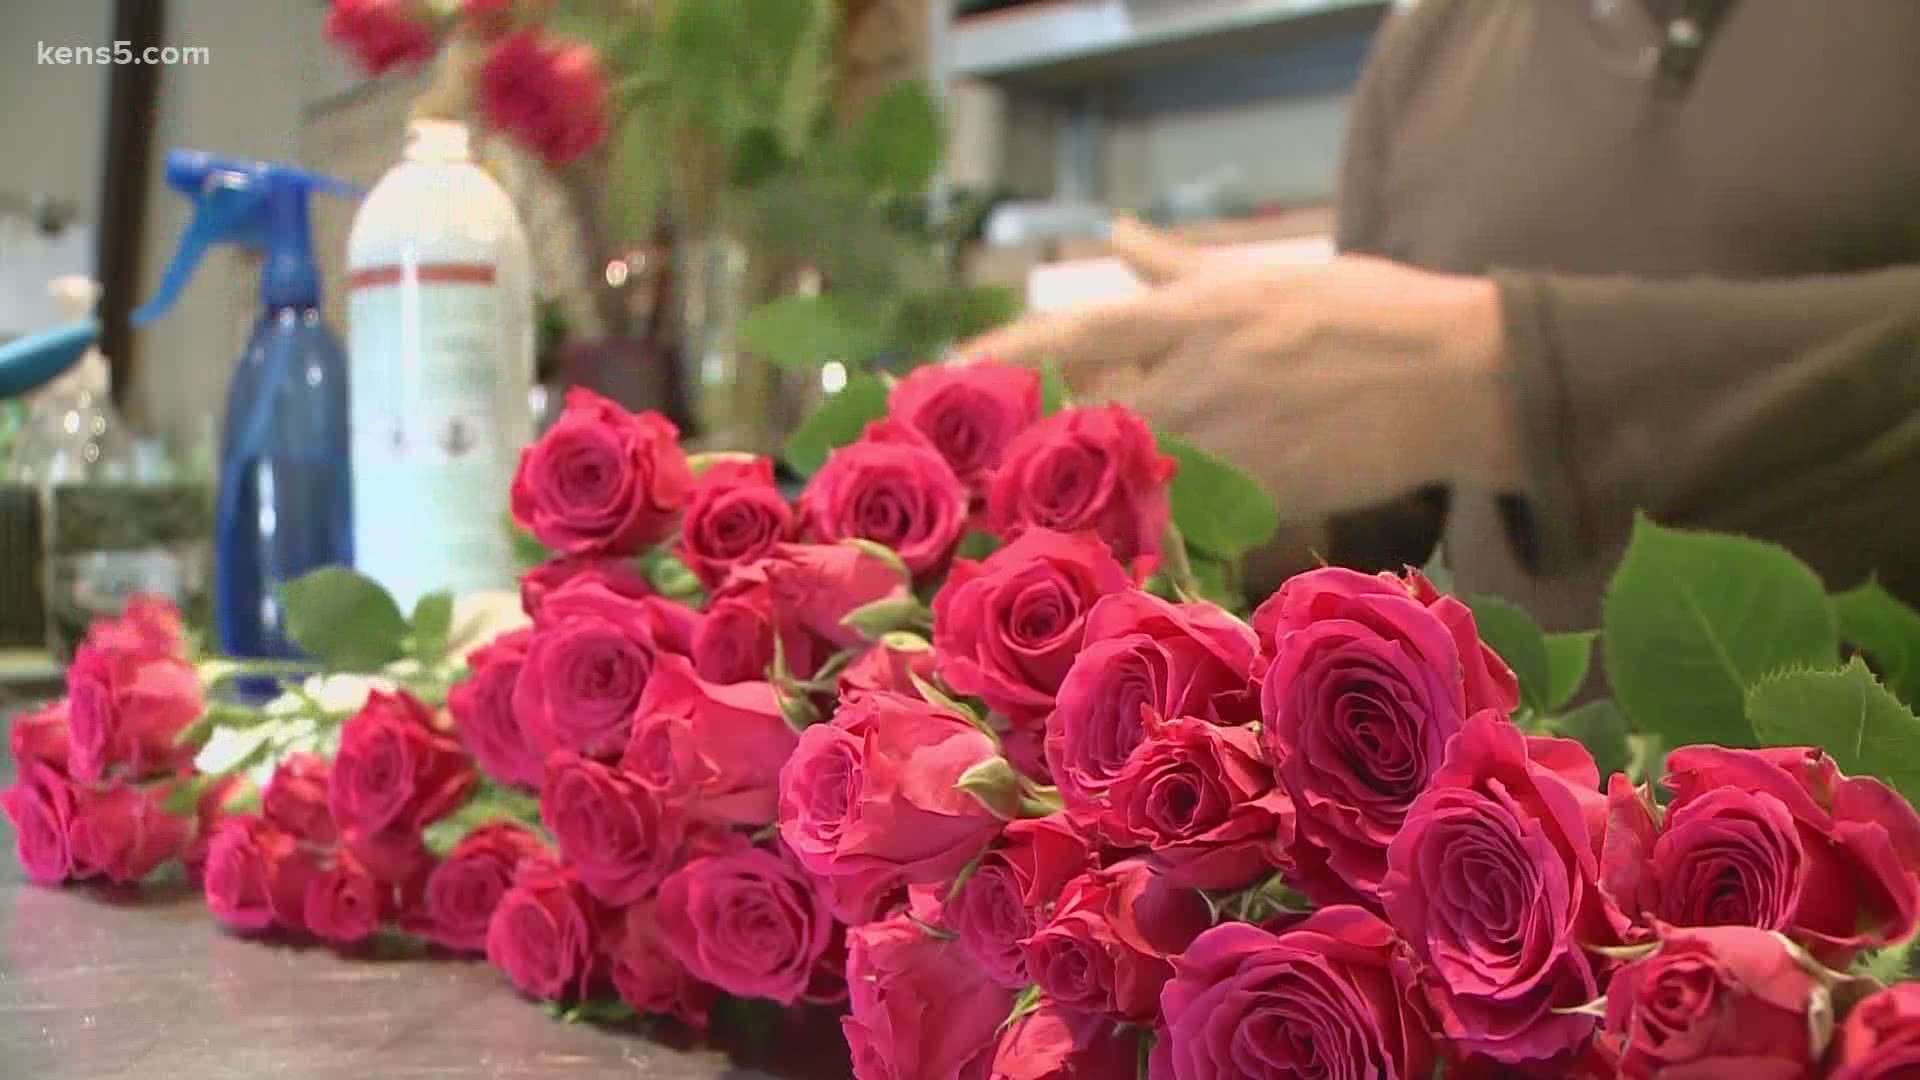 At one San Antonio florist shop, business is booming after months of quiet.